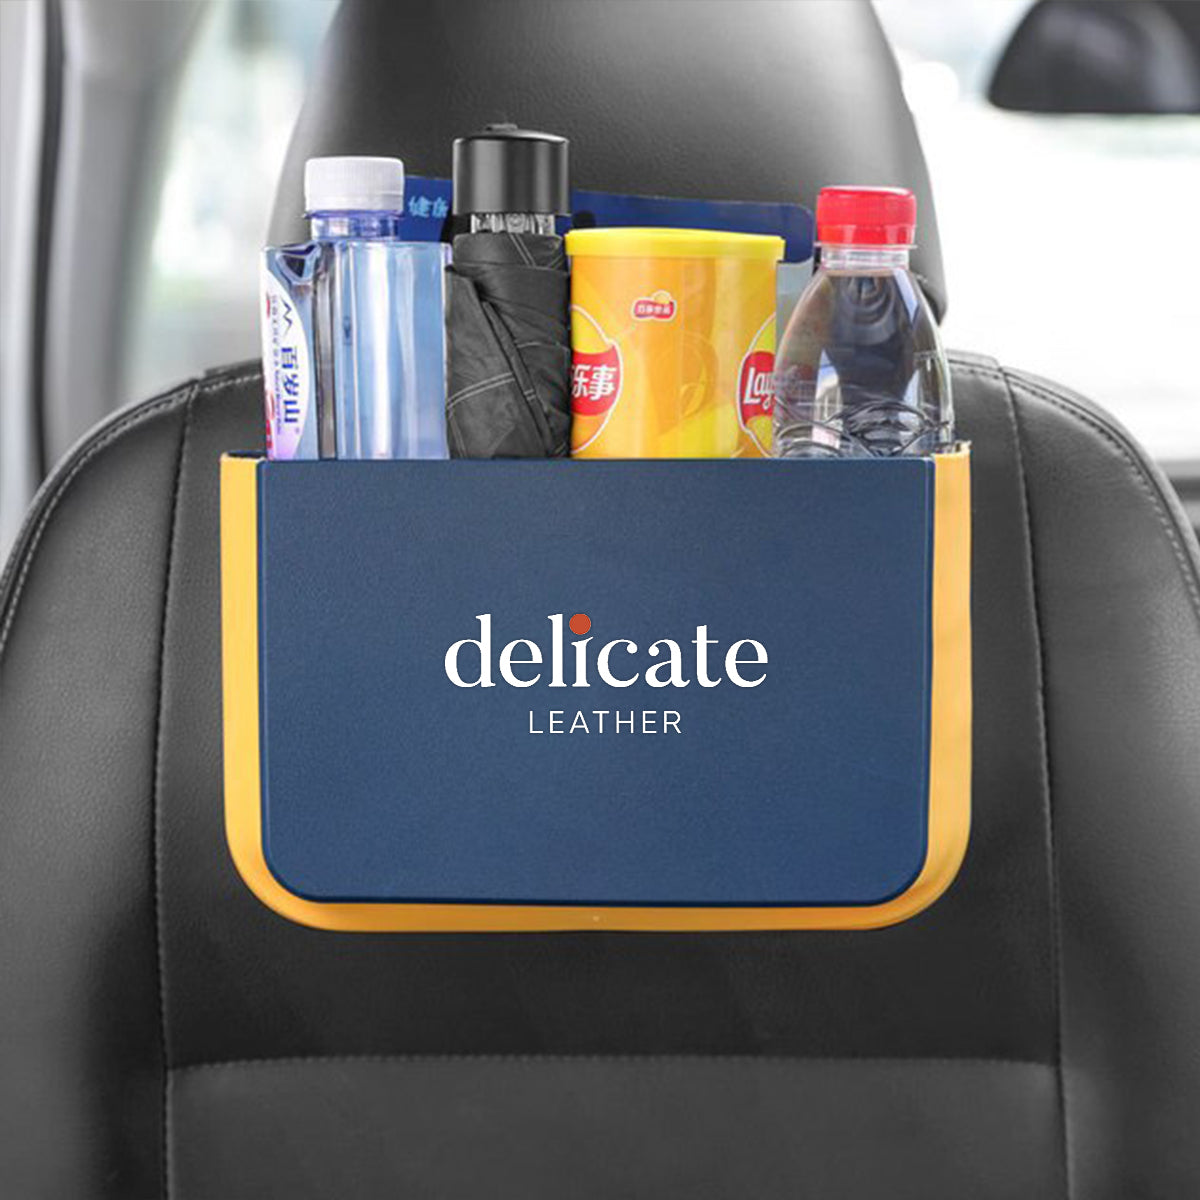 Delicate Leather Hanging Waterproof Car Trash can-Foldable, Custom For Your Cars, Waterproof, and Equipped with Cup Holders and Trays. Multi-Purpose, Car Accessories CH11992 - Delicate Leather